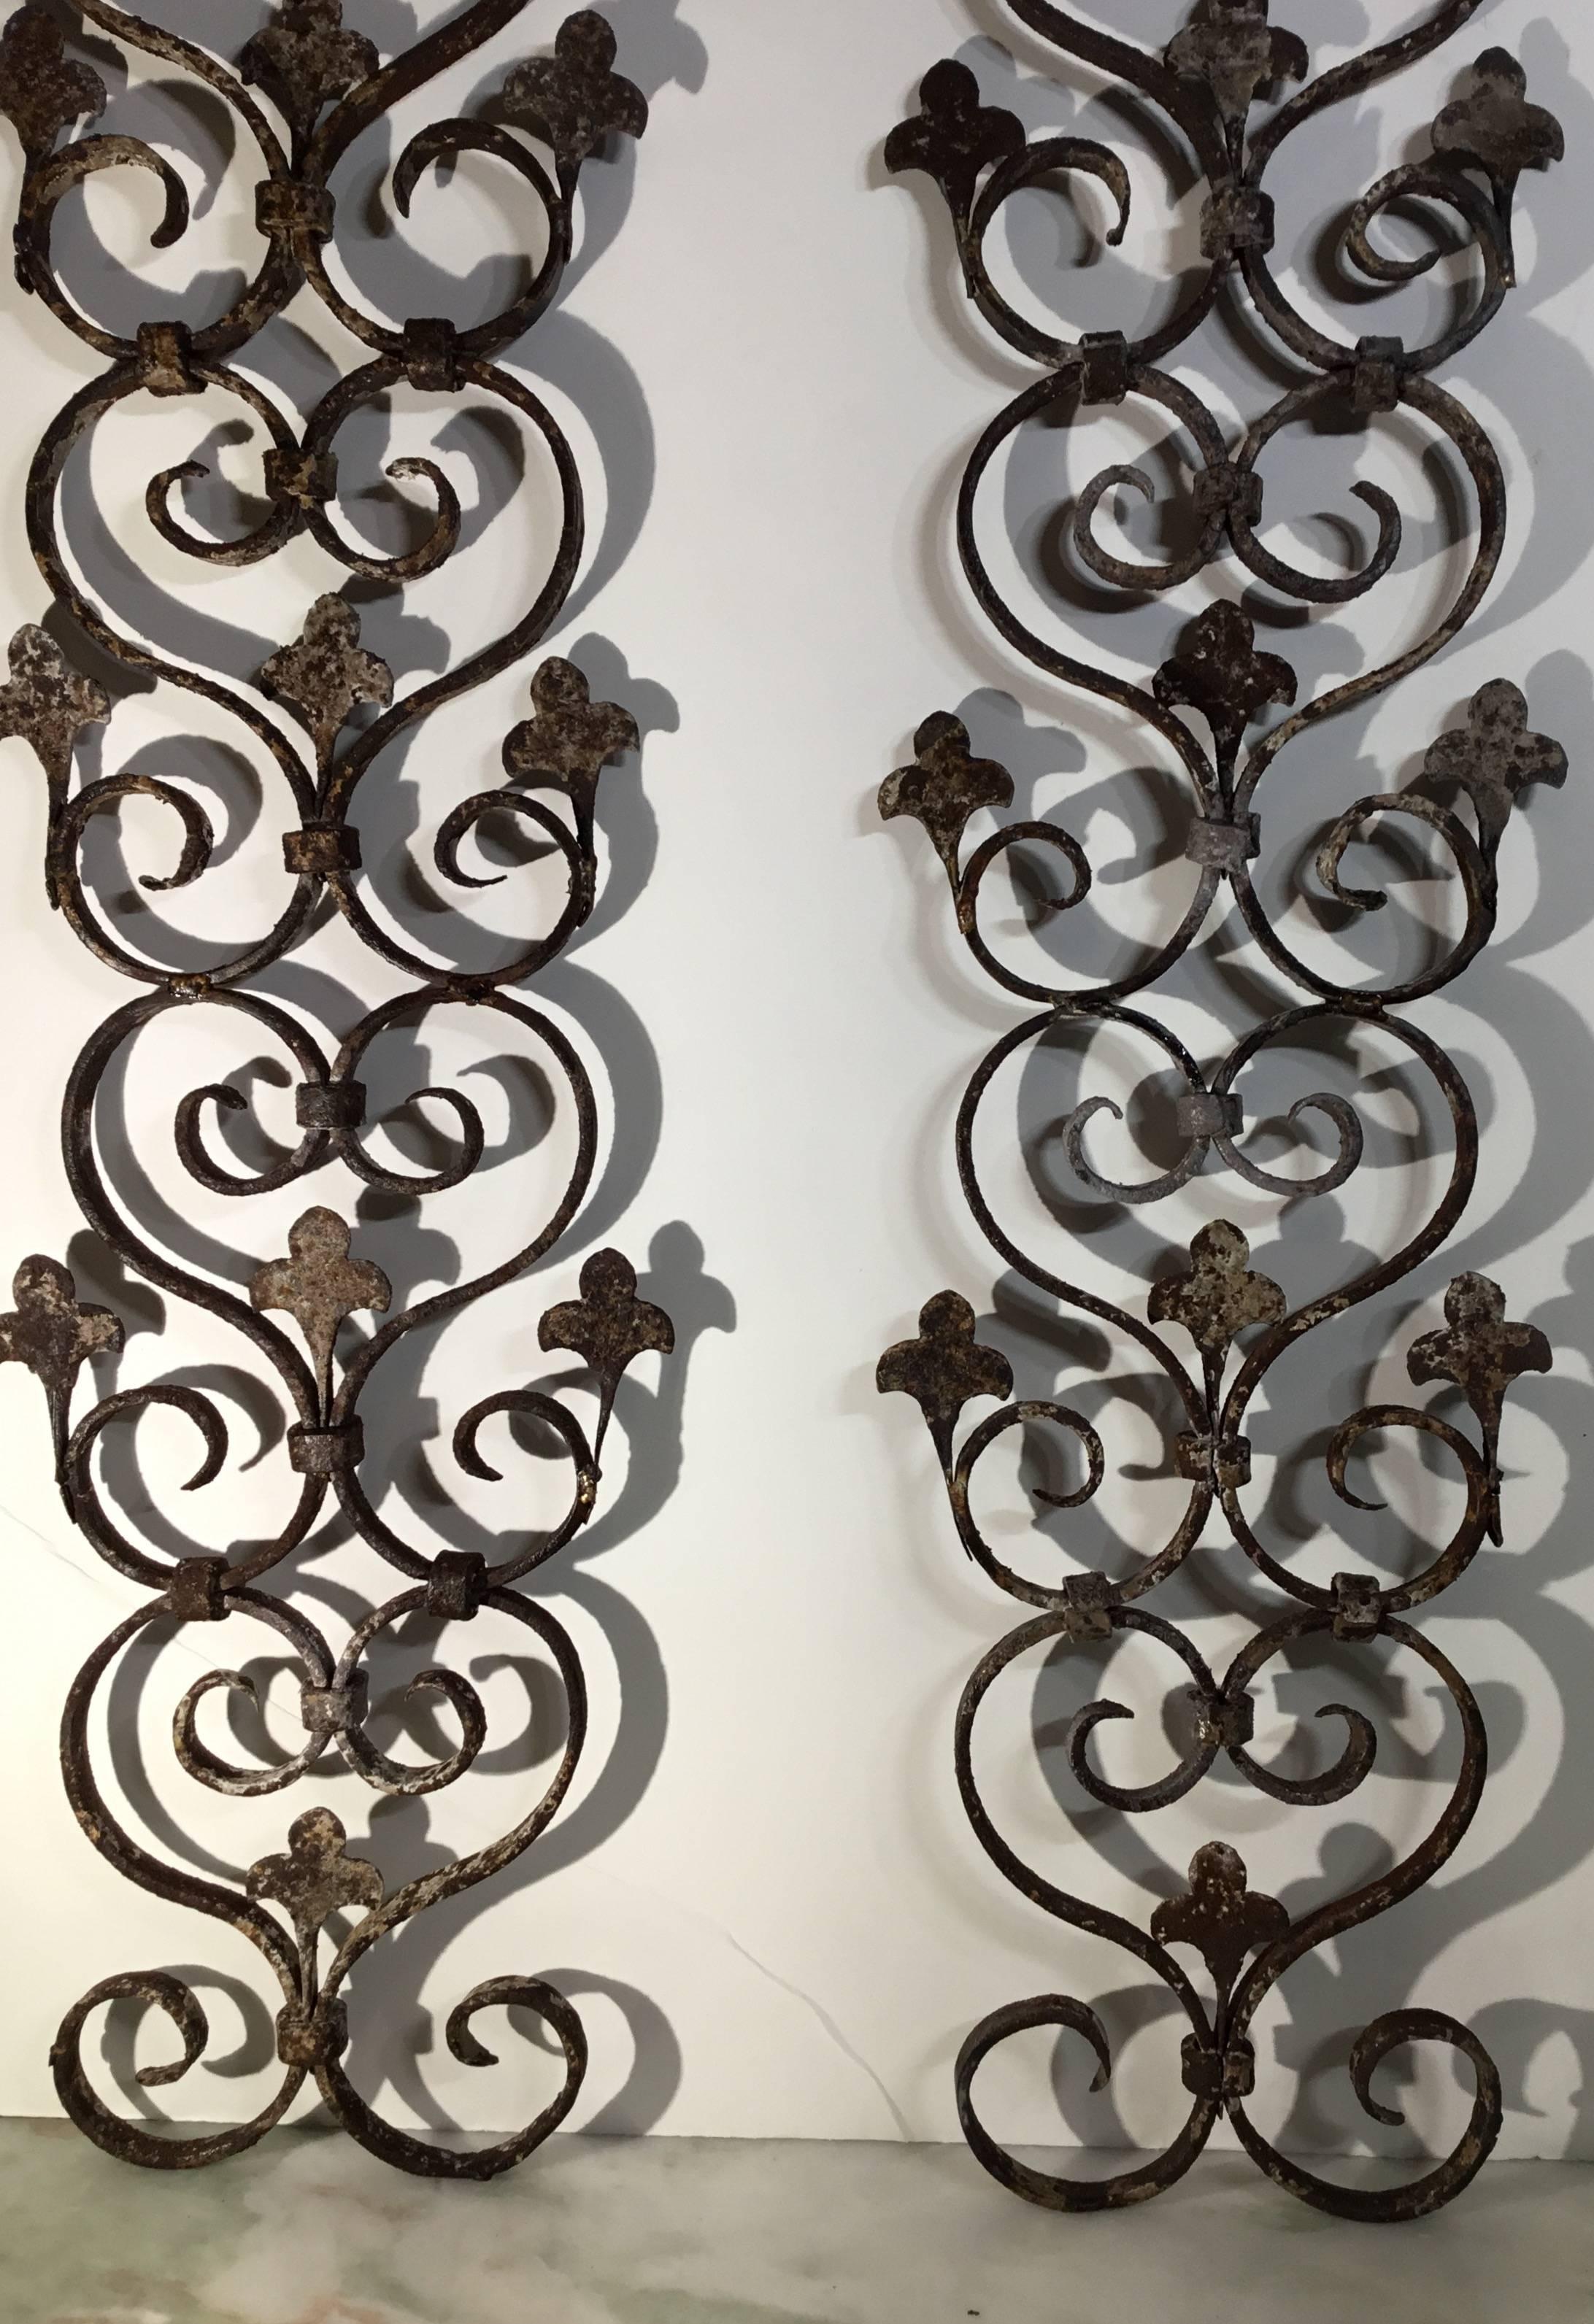 Forged Pair of Wrought Iron Wall Hanging